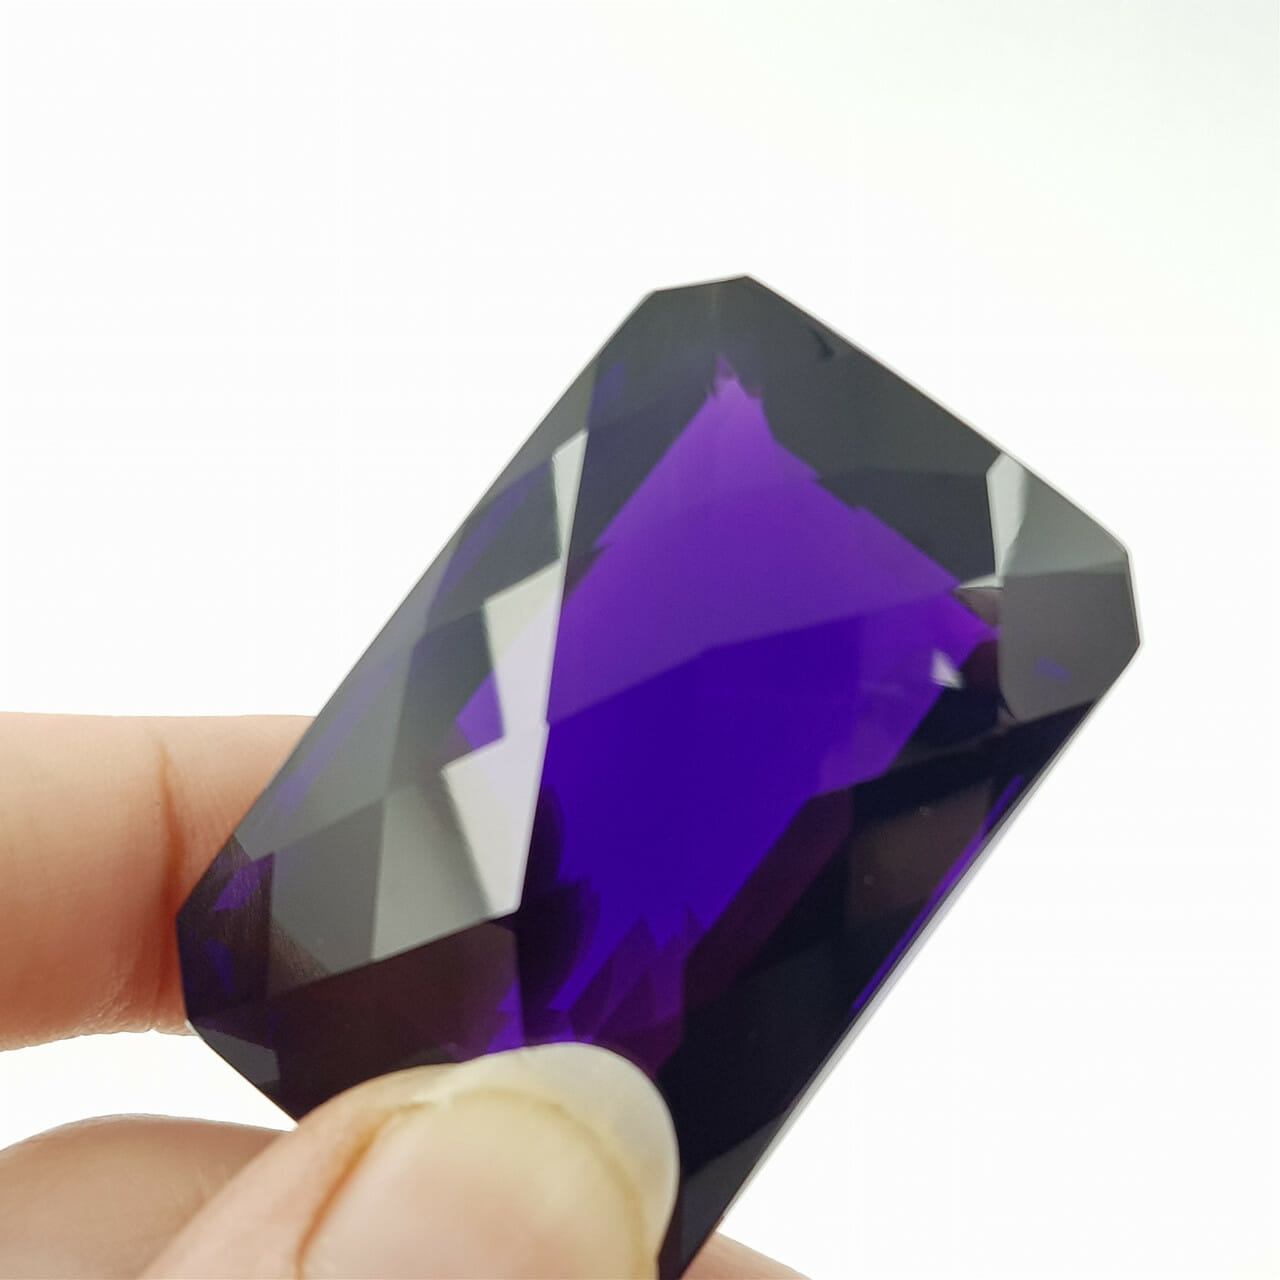 201.75CT SYNTHETIC AMETHYST STONE VAL $995 #44996